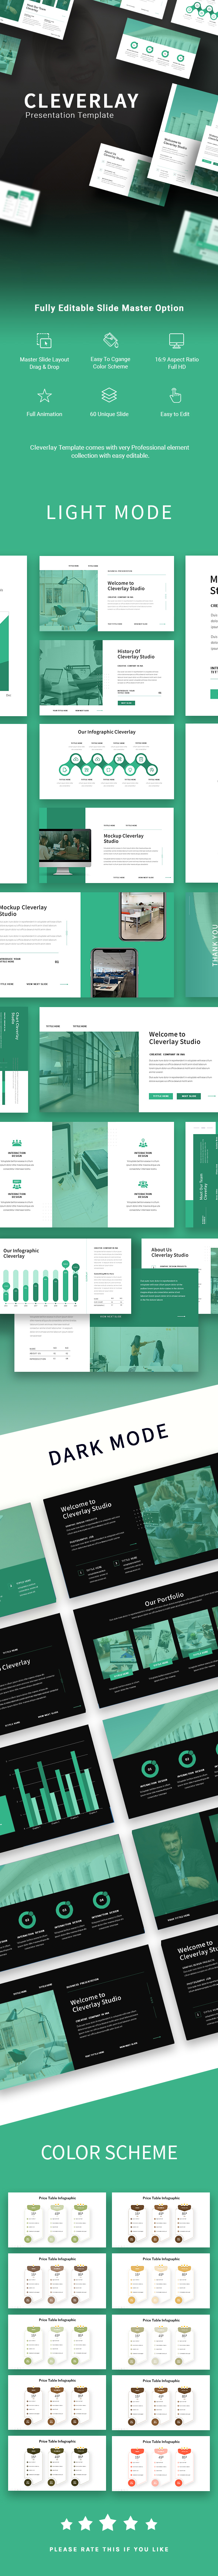 Cleverley Powerpoint Presentation Template